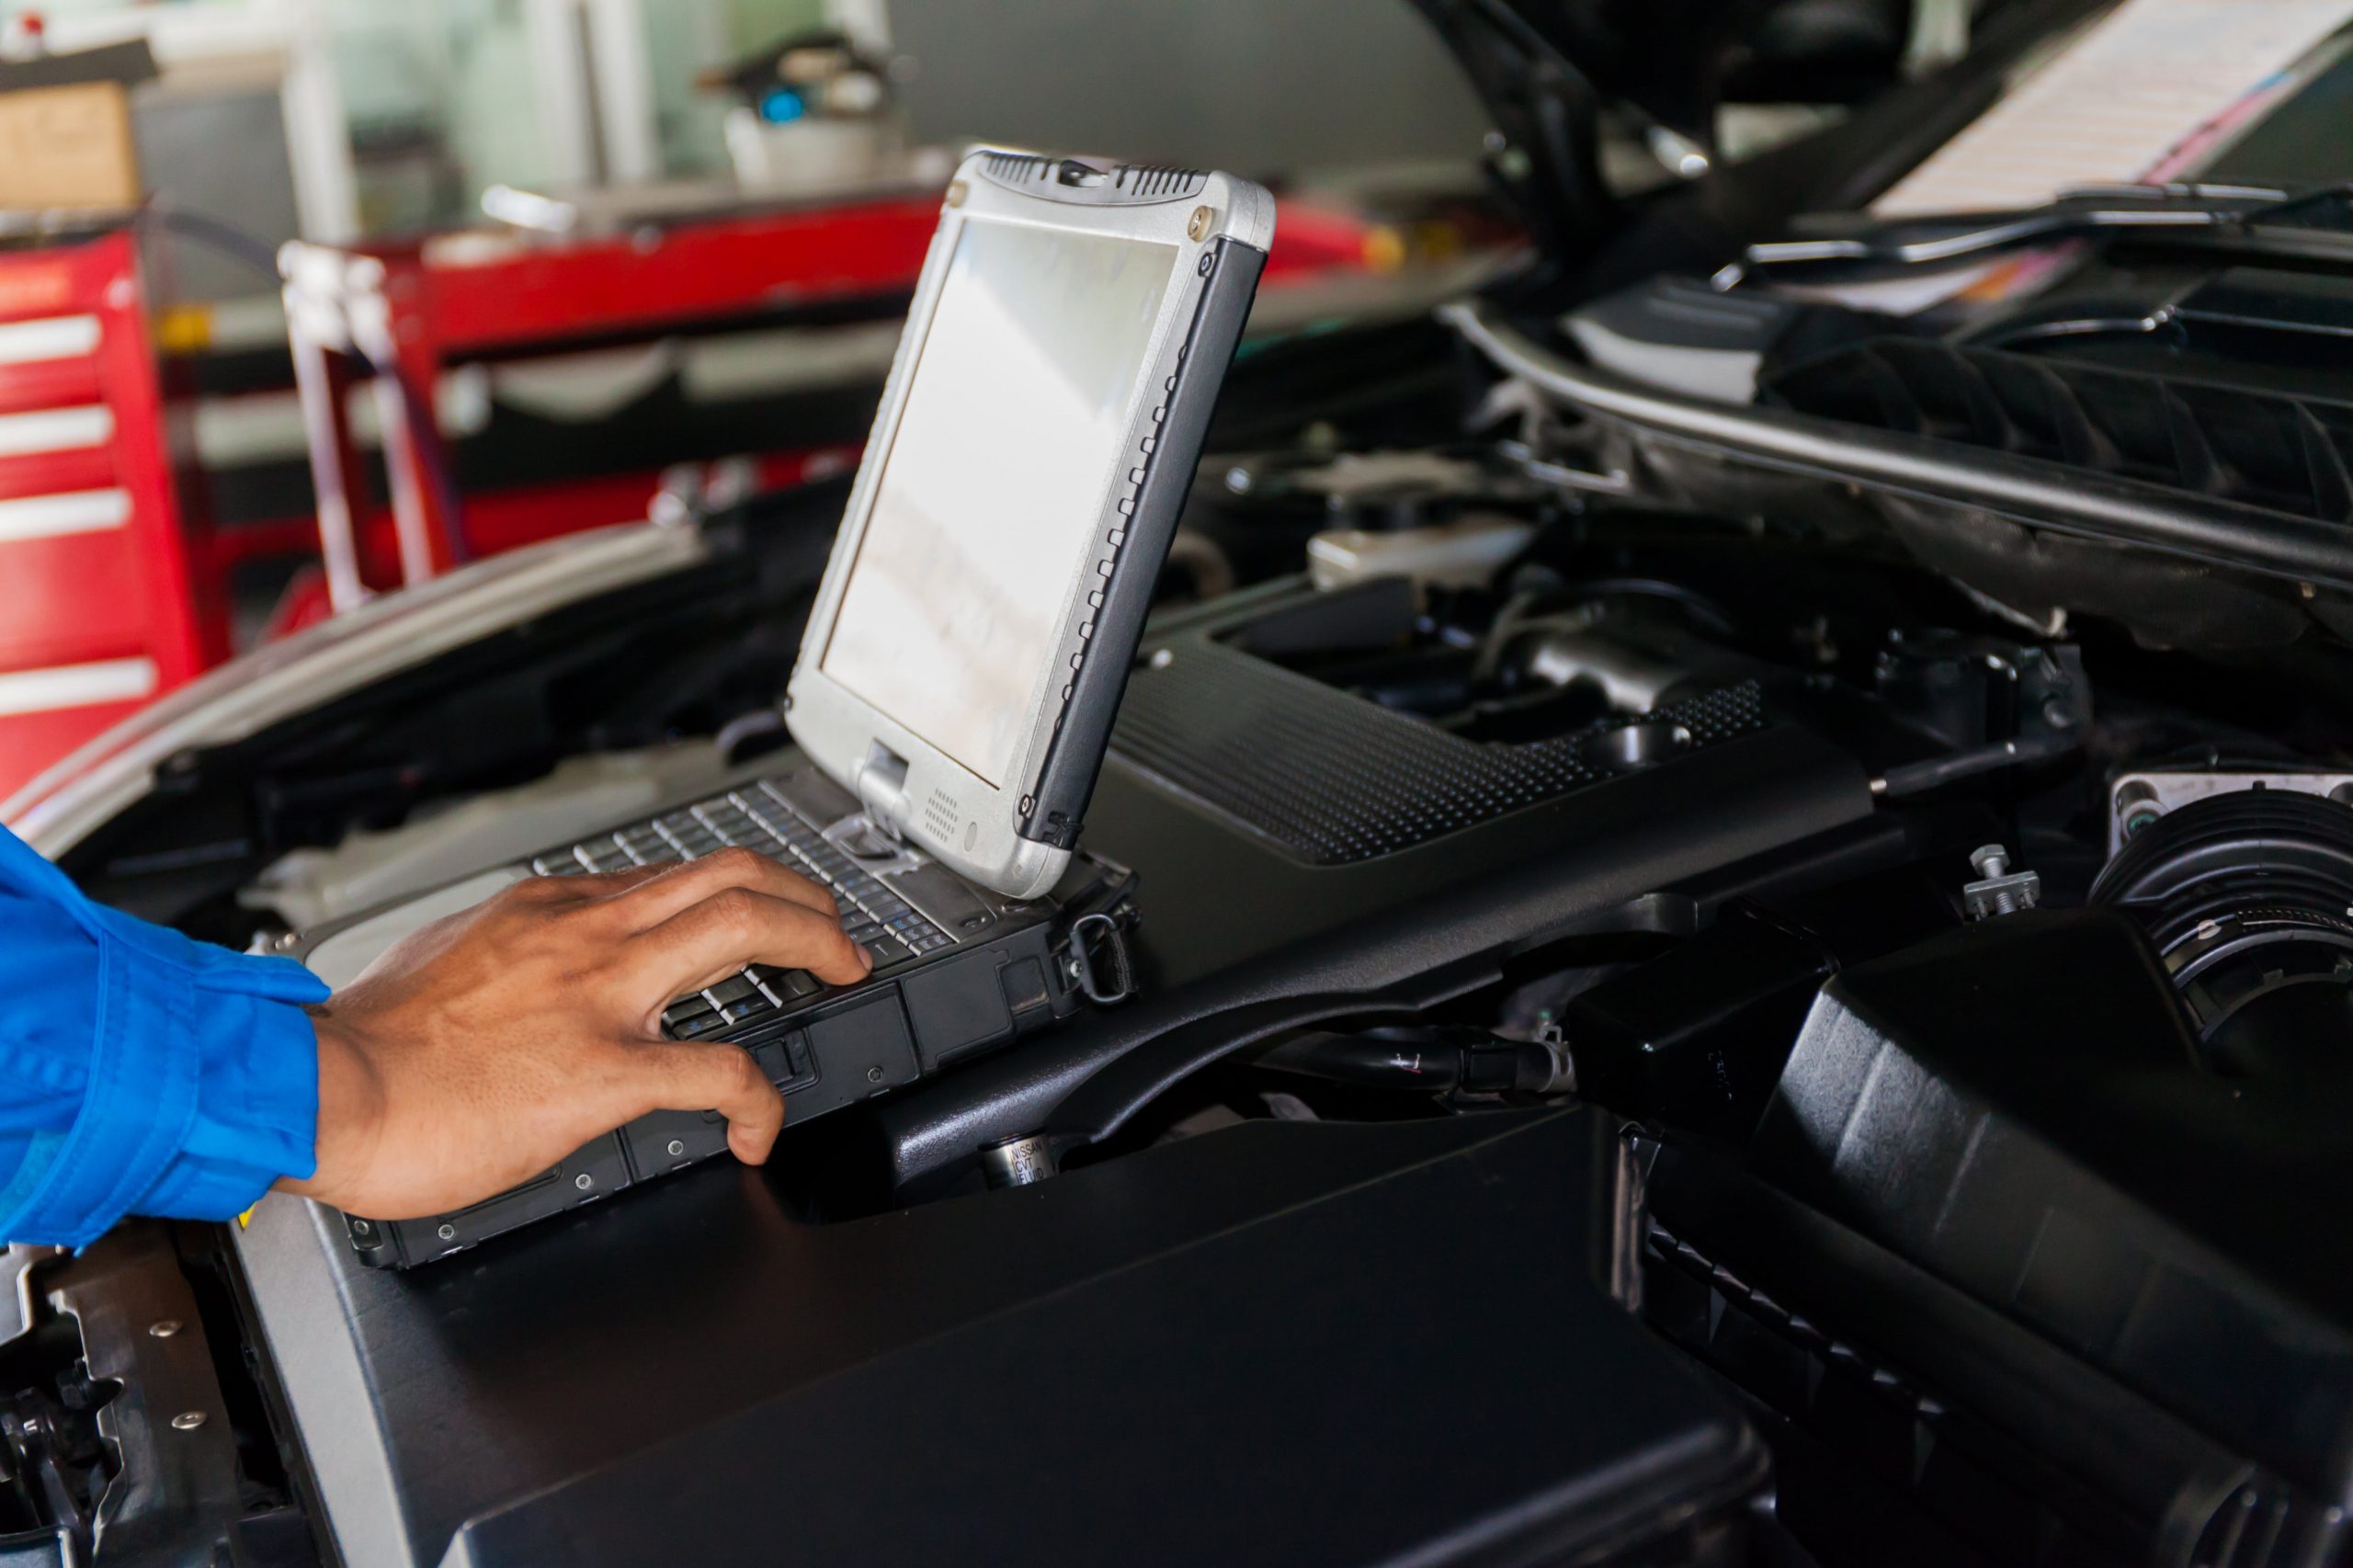 Mechanic inspecting a vehicle's engine with a laptop